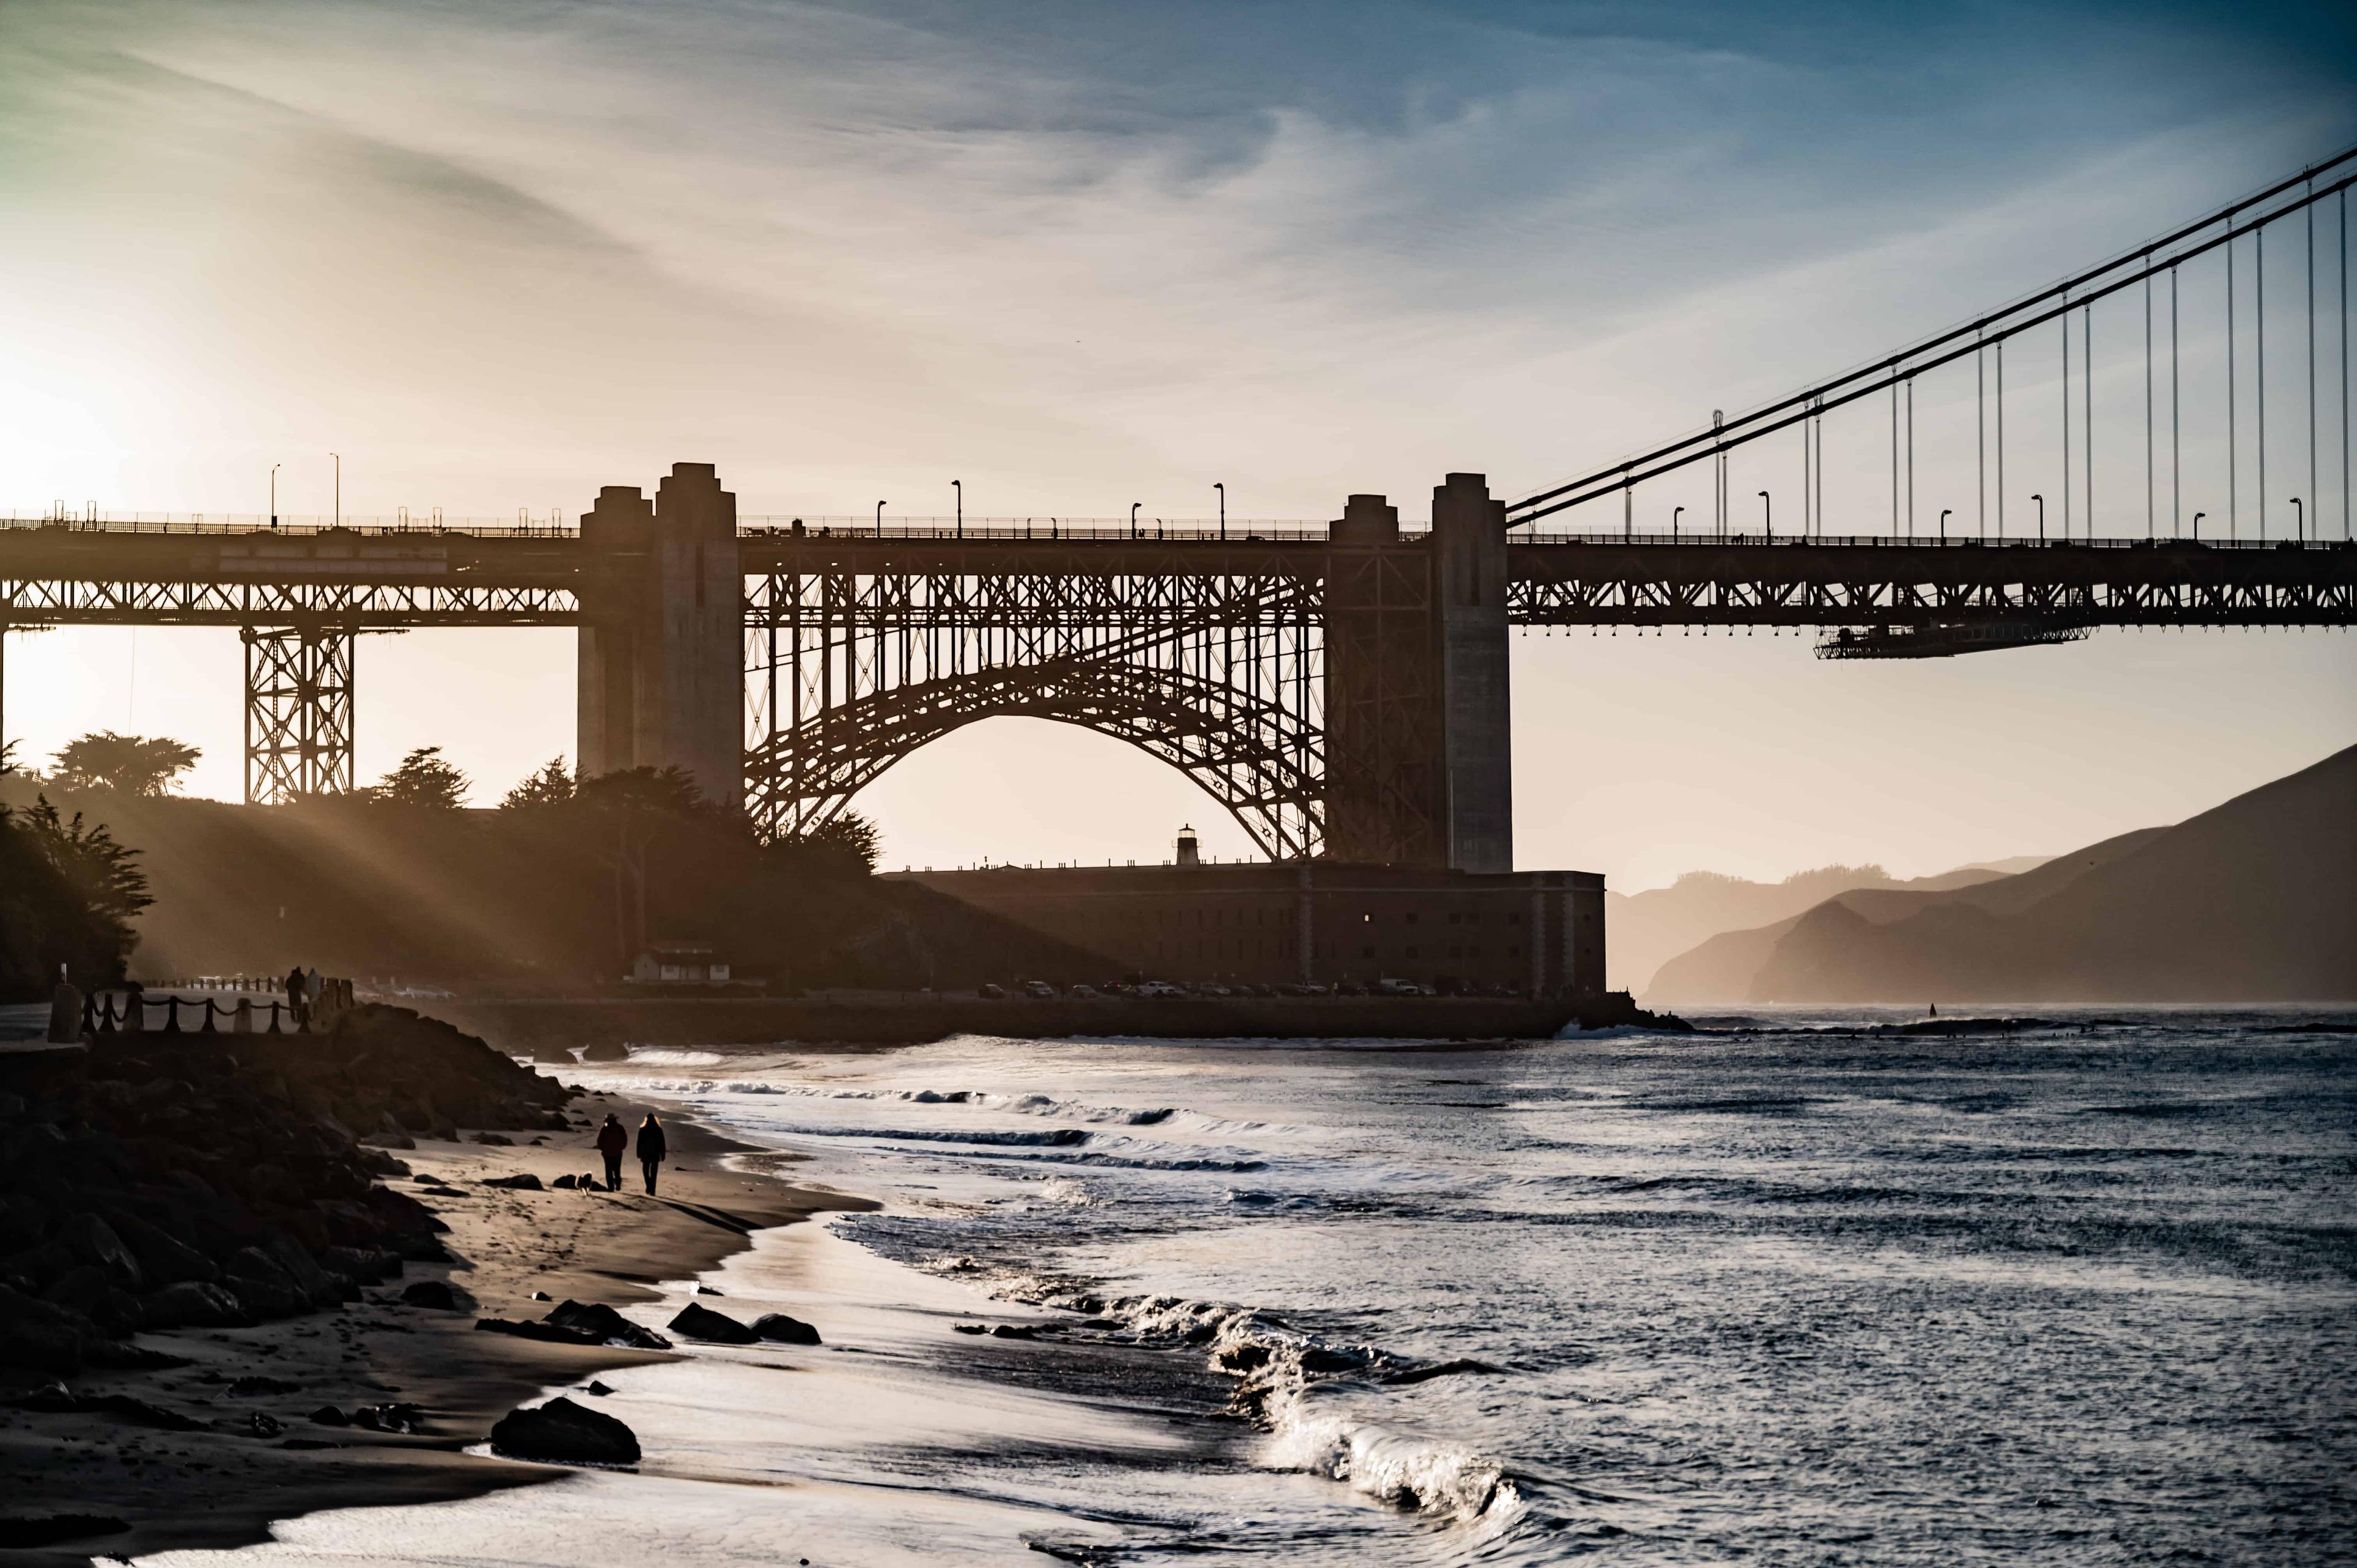 Beauty shot of Fort Point positioned in front of the Golden Gate Bridge with the sunset shining through